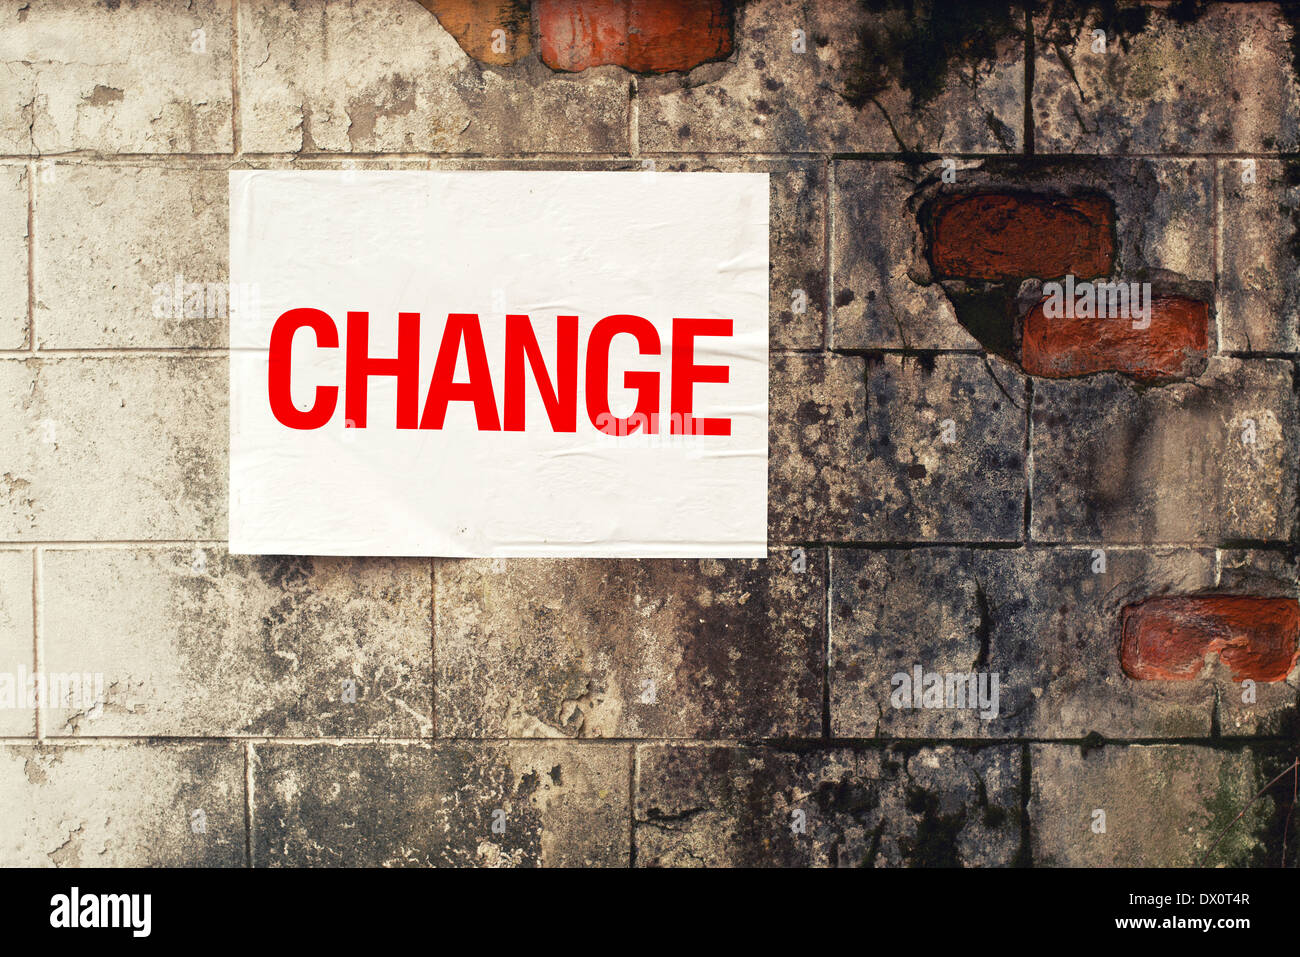 Change poster on grunge wall. Conceptual image. Stock Photo